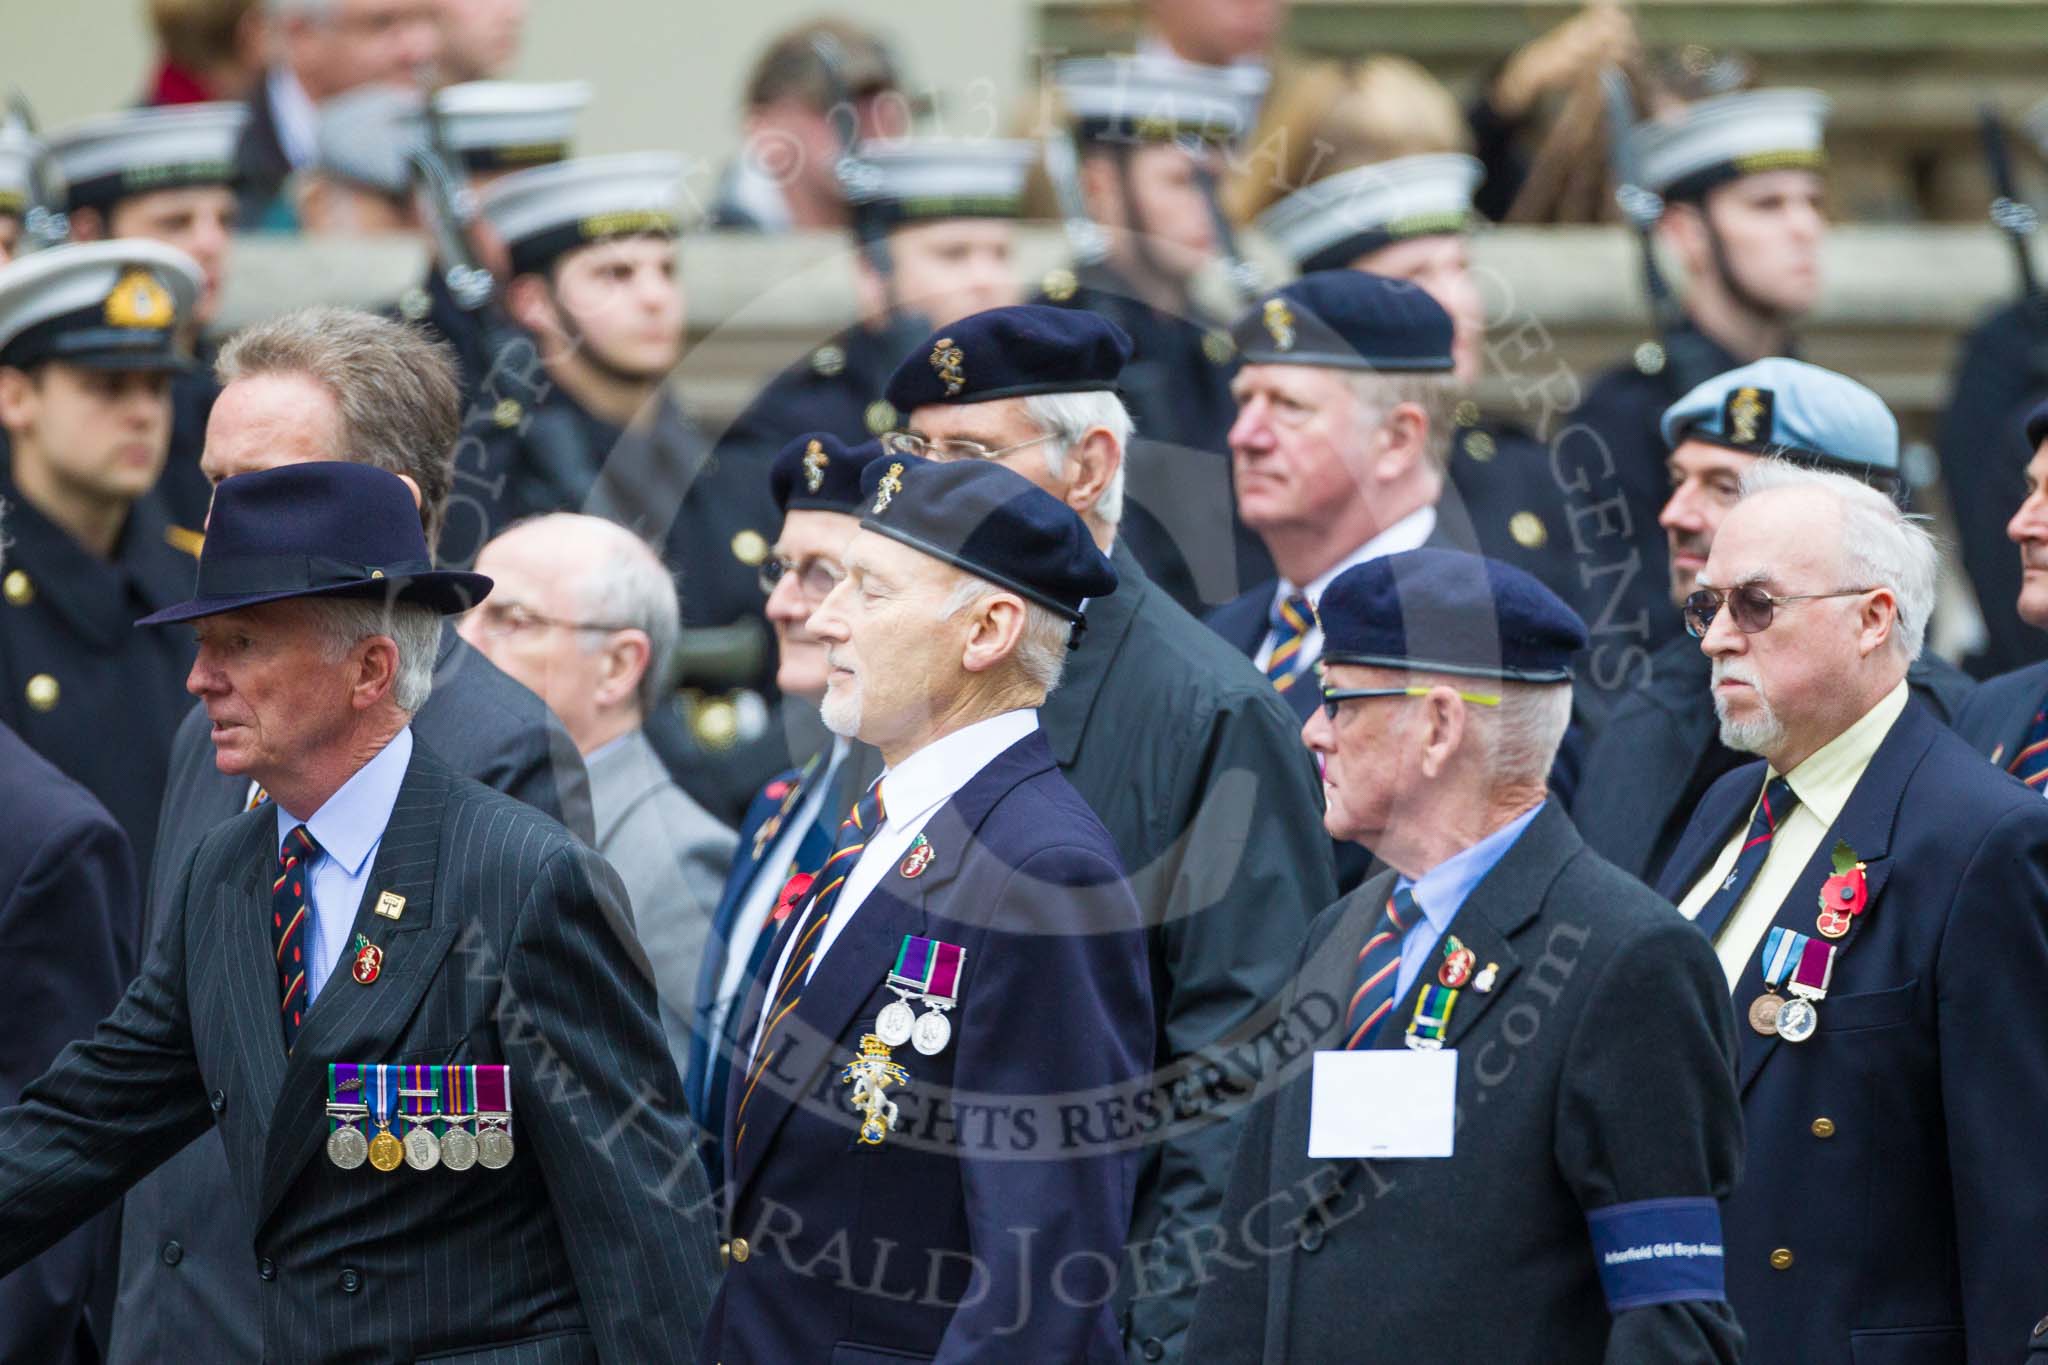 Remembrance Sunday at the Cenotaph 2015: Group B32, Arborfield Old Boys Association.
Cenotaph, Whitehall, London SW1,
London,
Greater London,
United Kingdom,
on 08 November 2015 at 11:42, image #251